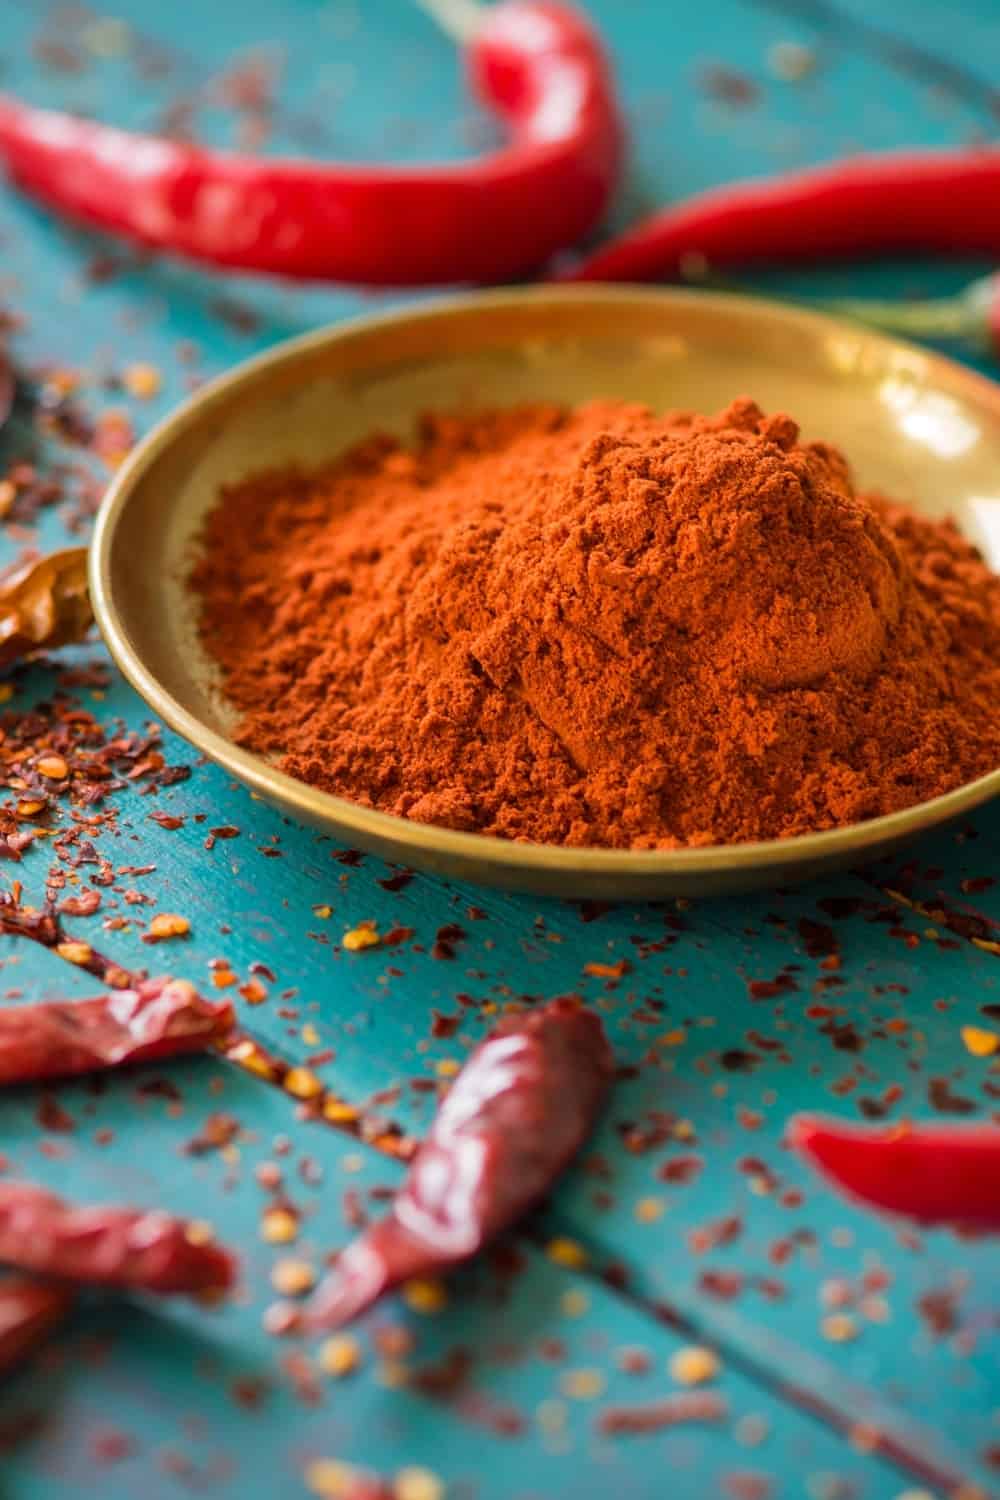 Chili powder and fresh and dried peppers on table background